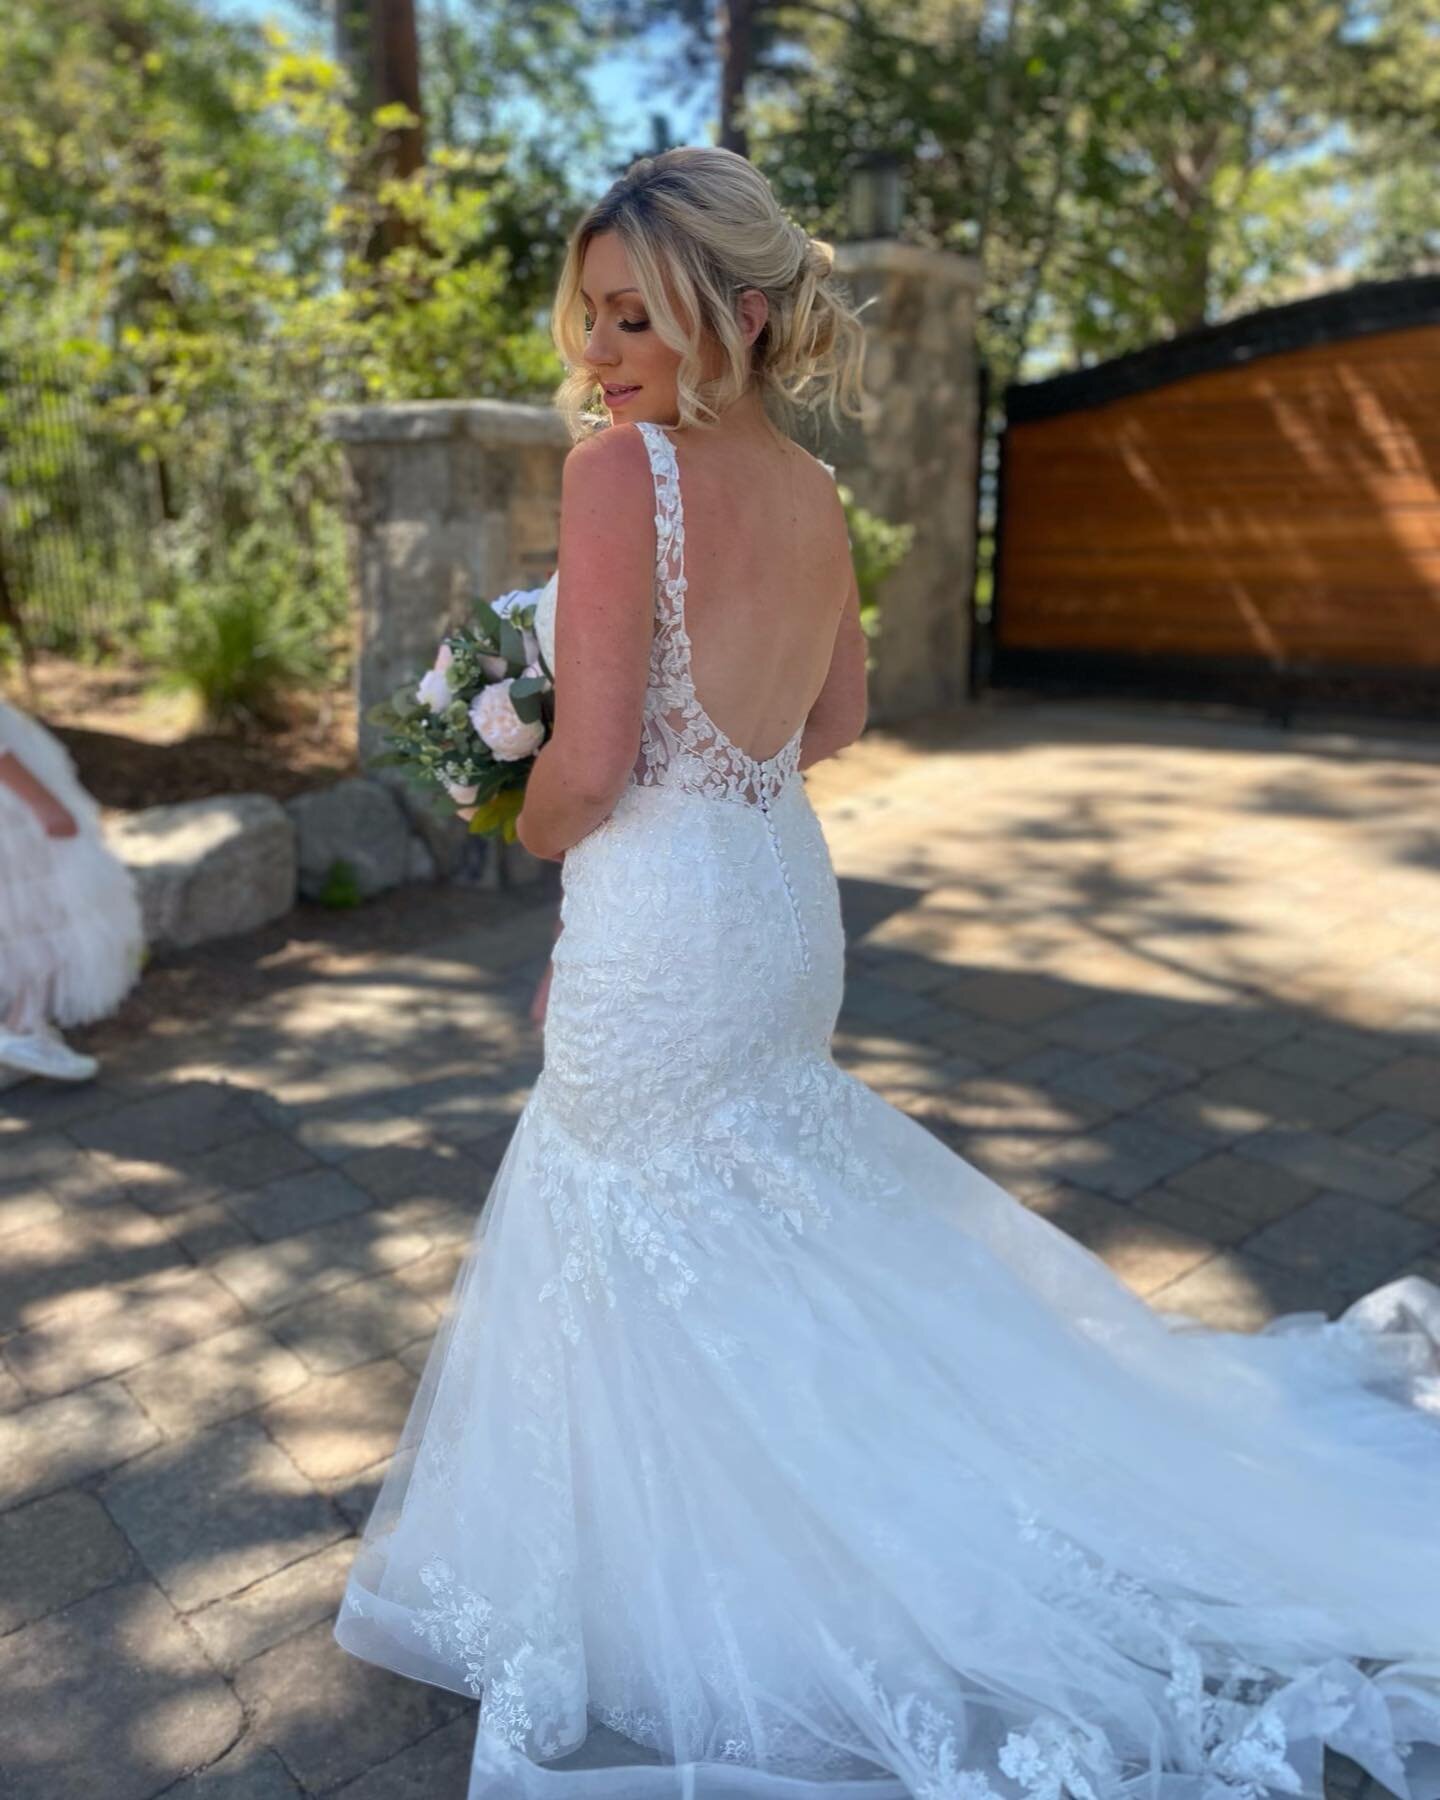 So we pulled this beautiful look off without even doing a trial @jaimerssss Hair and makeup by @mandyshayenv #renohair #renomakeup #laketahoehair #laketahoemakeup #laketahoebride #laketahoewedding #northerncaliforniamakeup #northerncaliforniawedding 